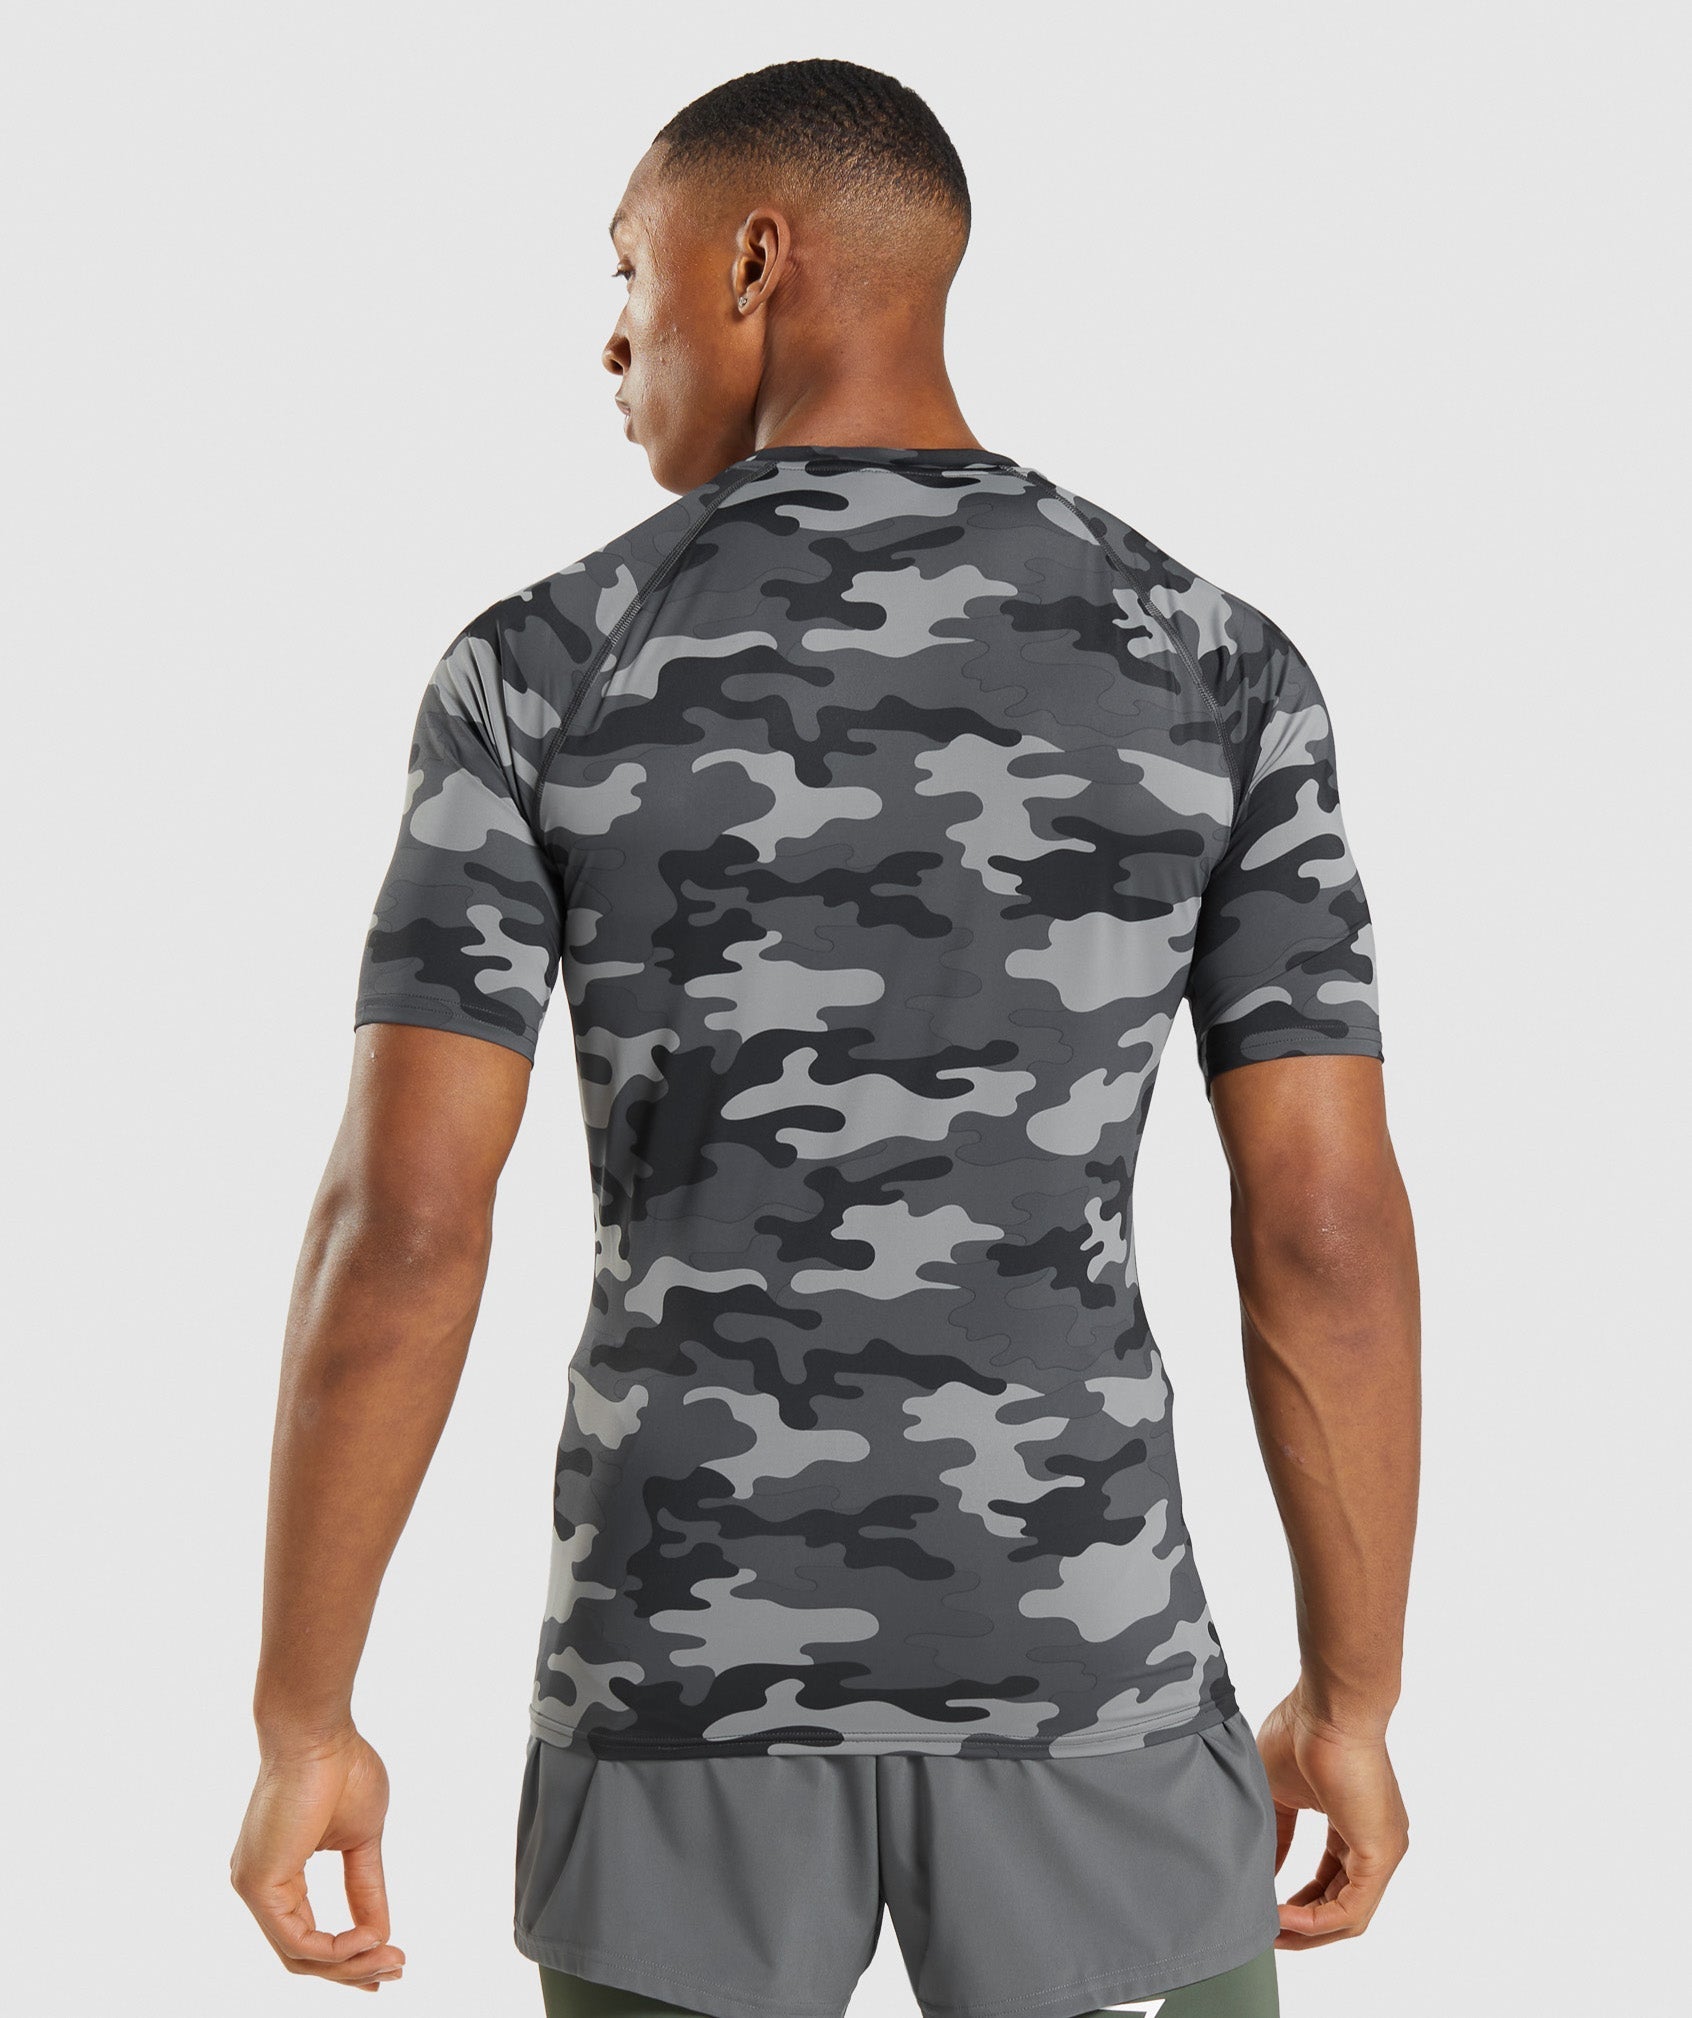 Element Baselayer T-Shirt in Camo Grey Print - view 2